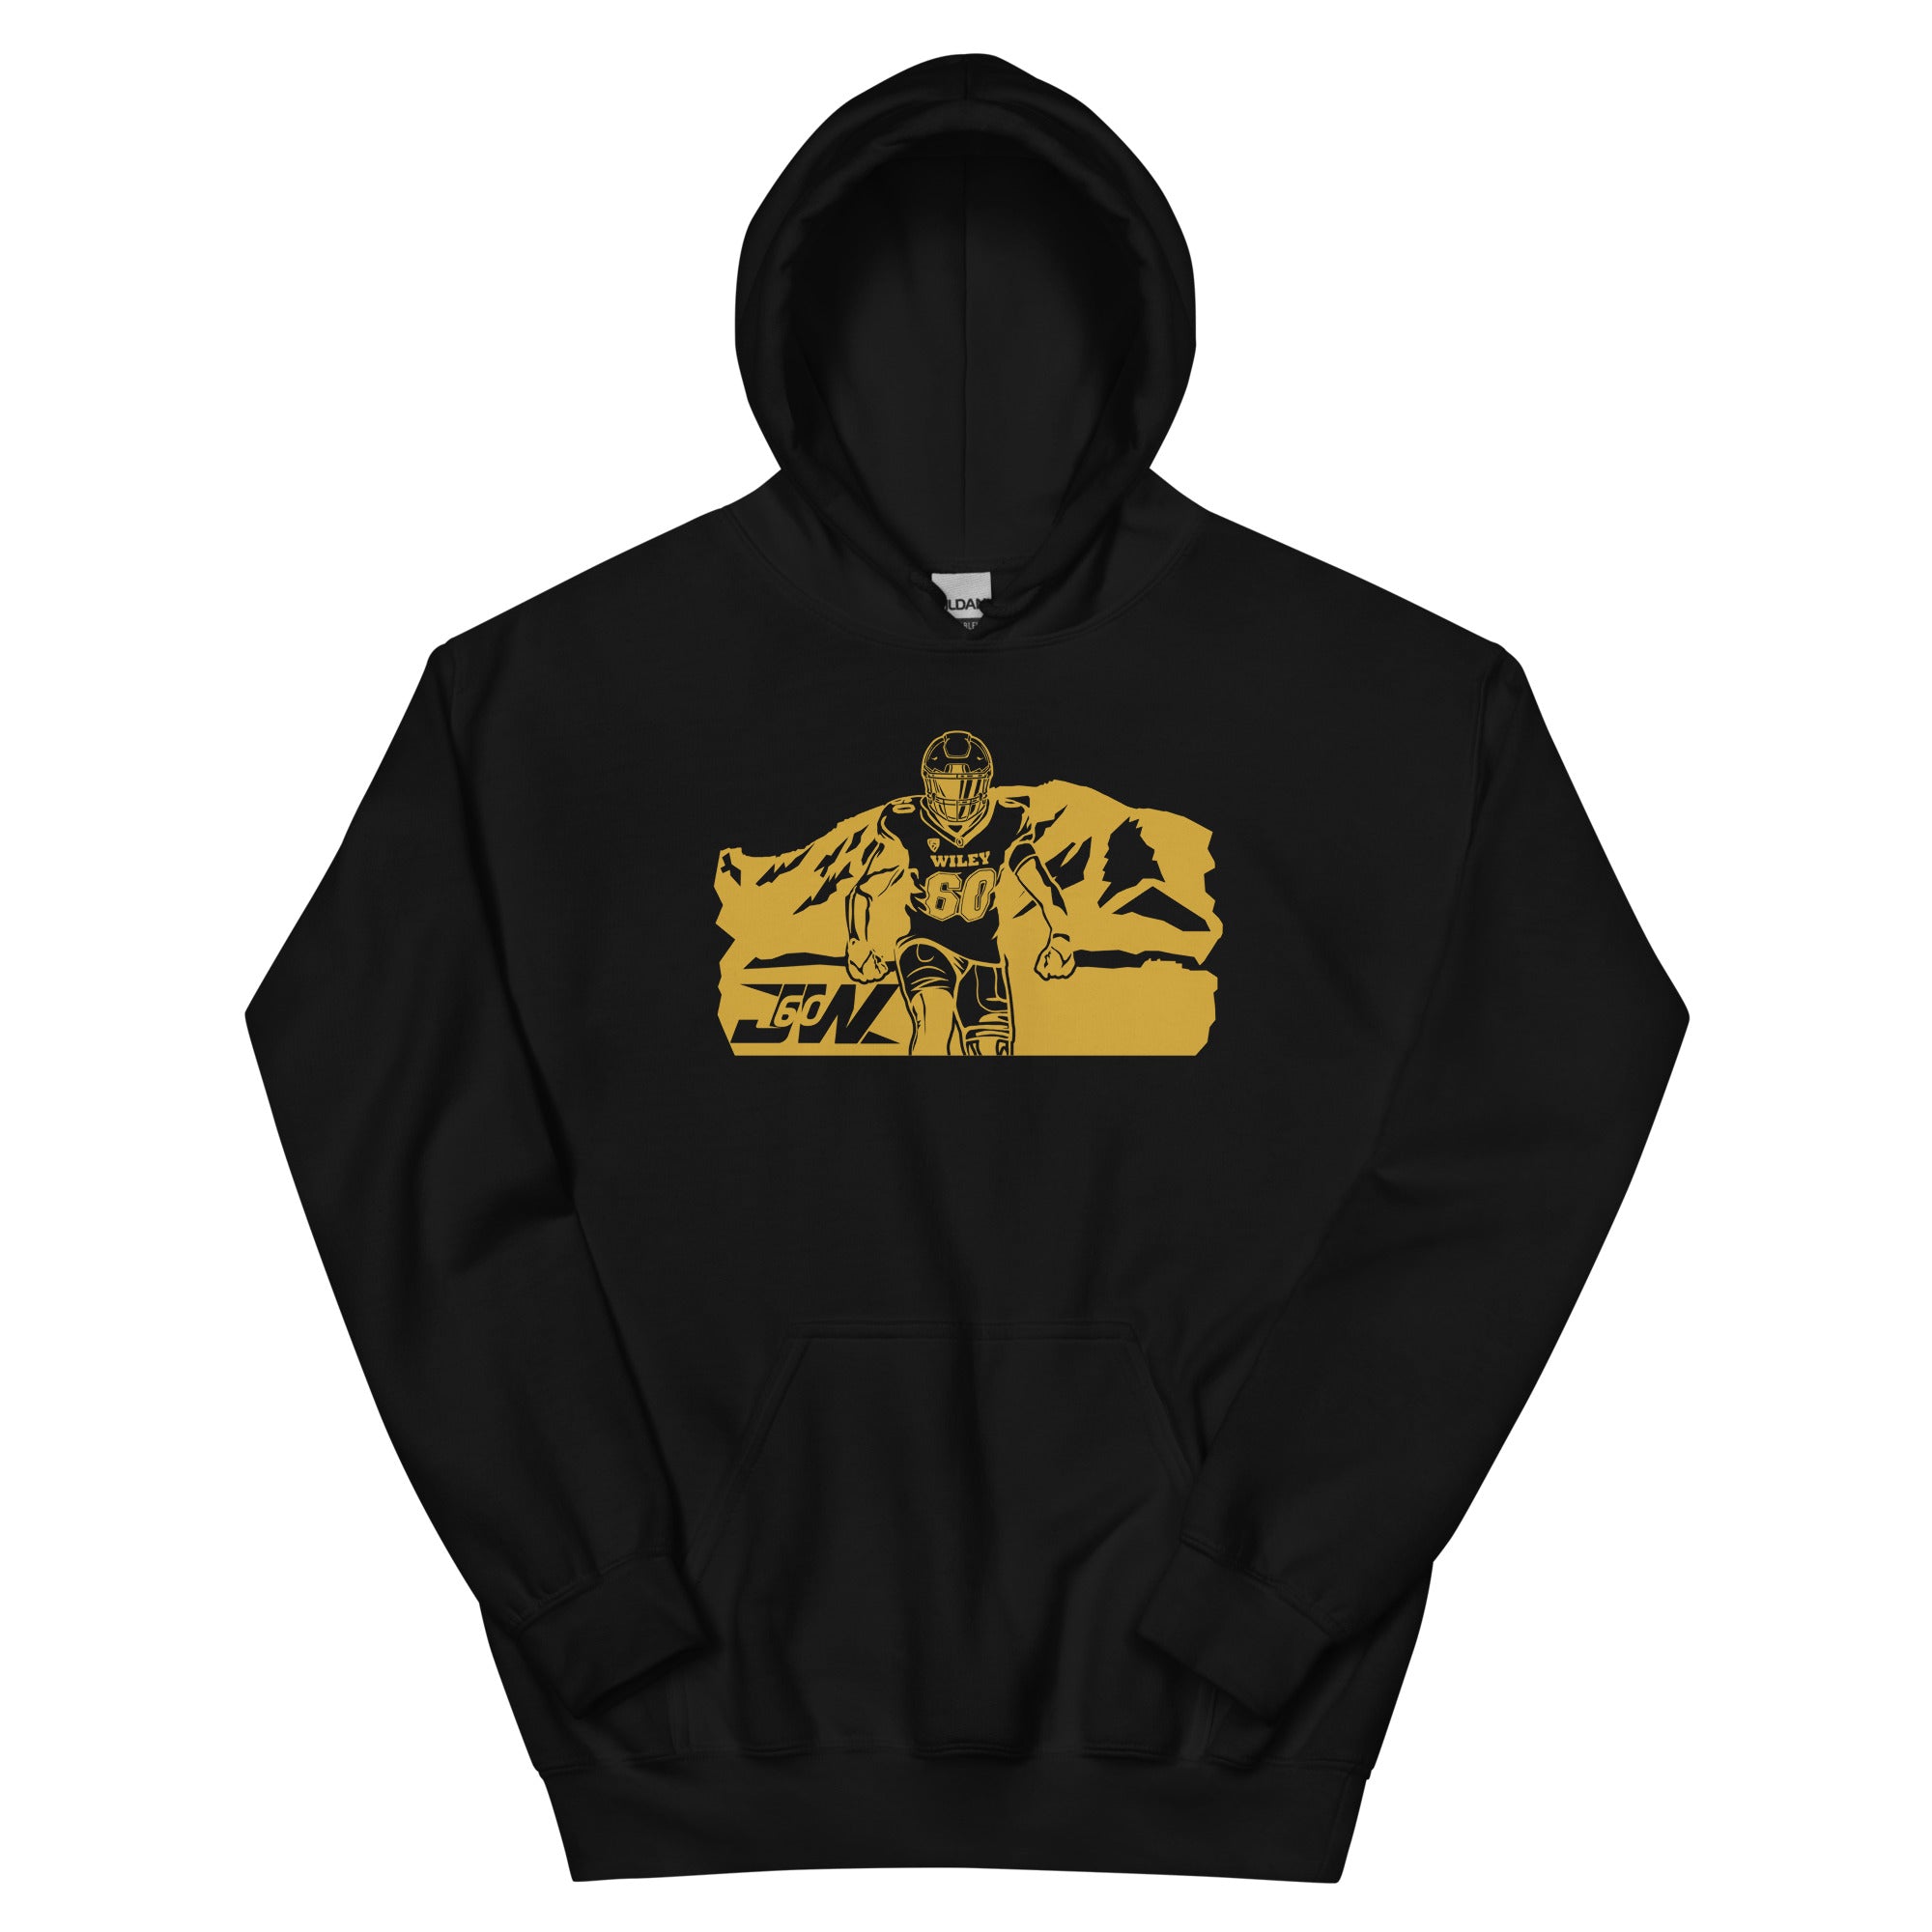 Jake Wiley Graphic Hoodie